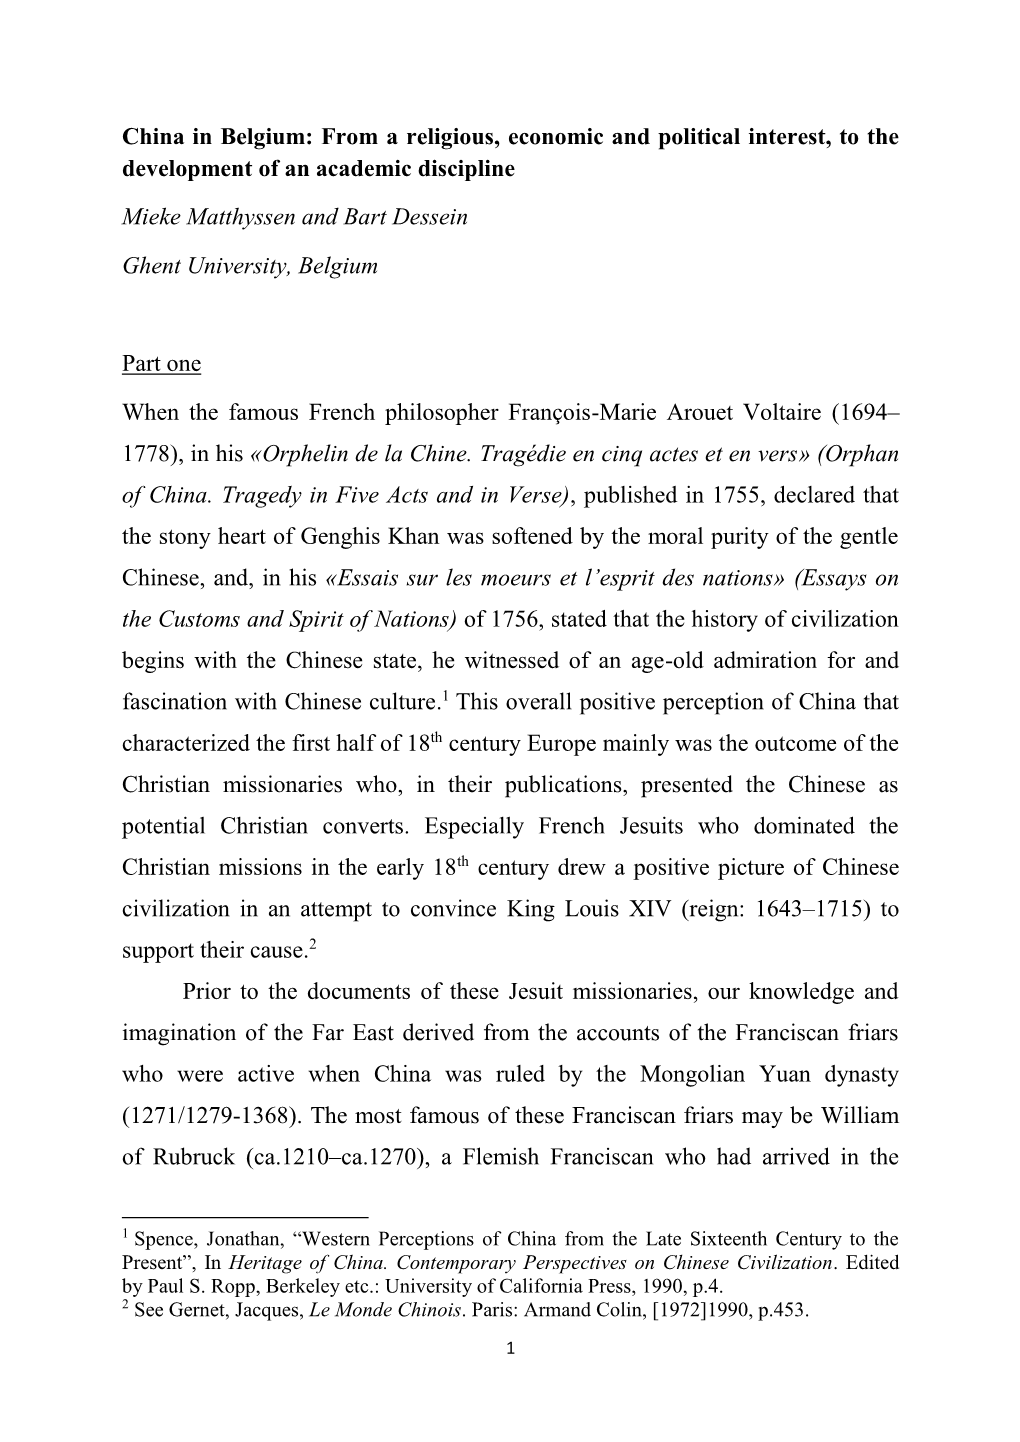 China in Belgium: from a Religious, Economic and Political Interest, to the Development of an Academic Discipline